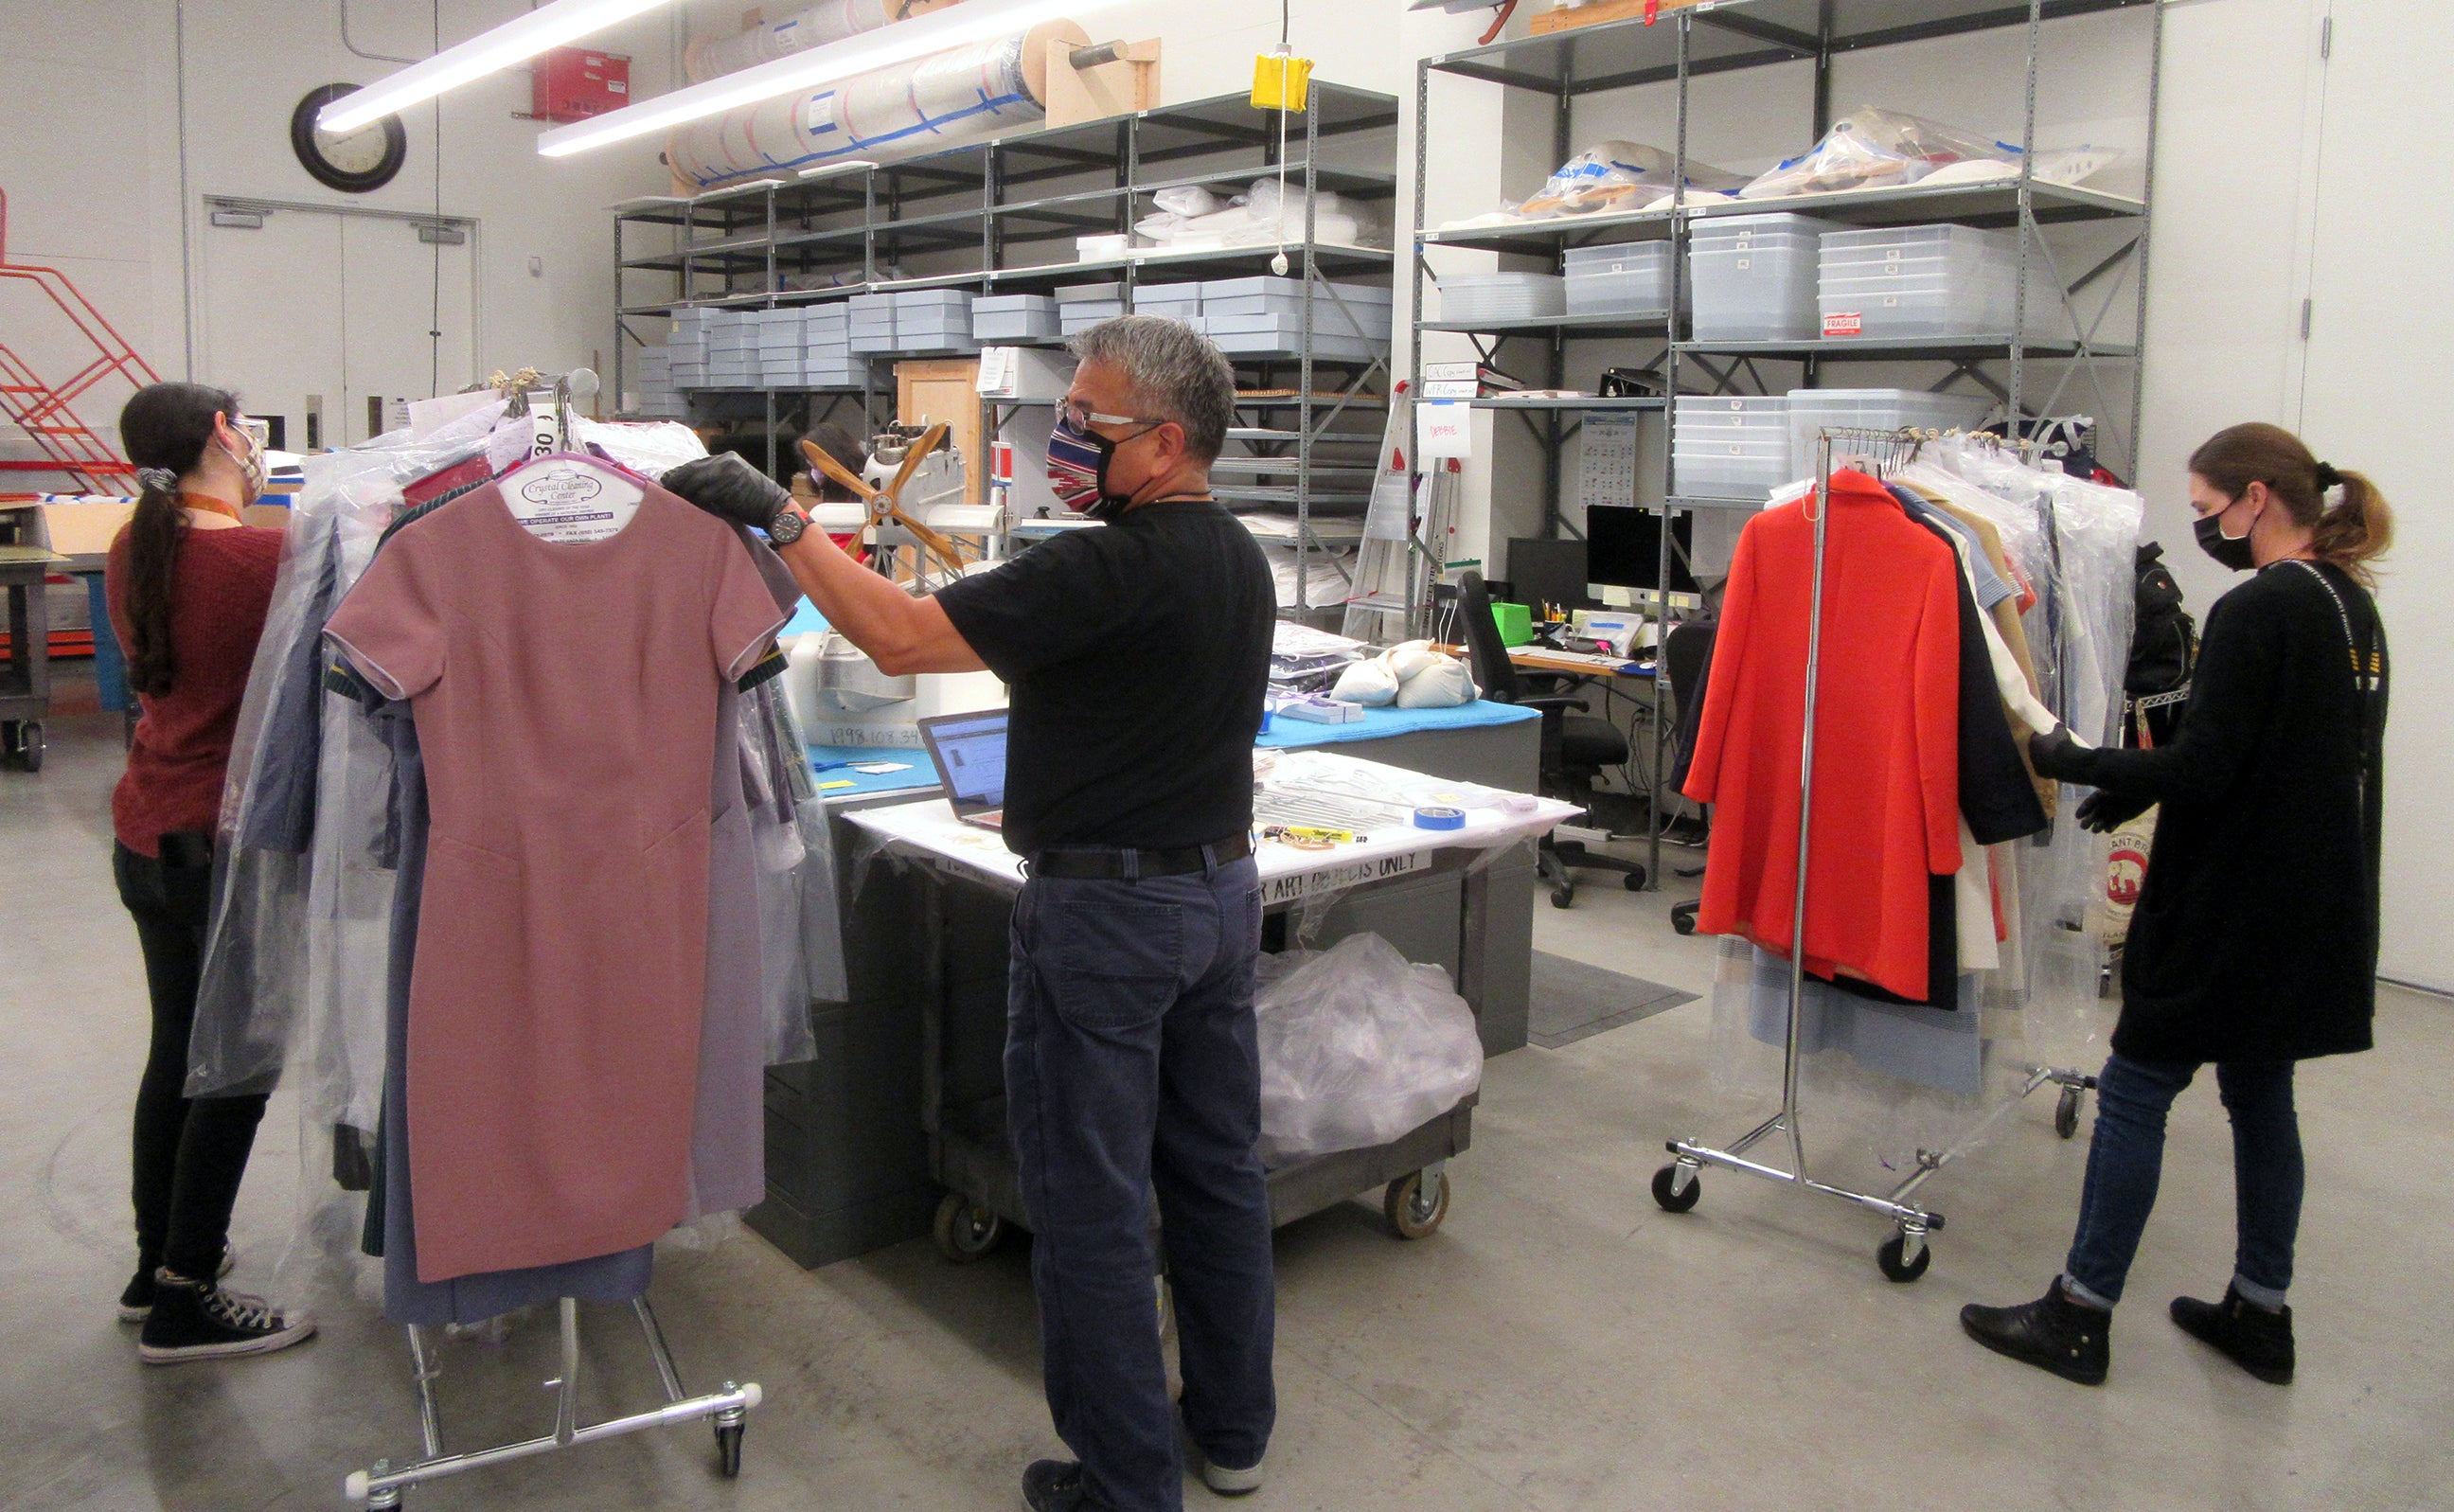 The Collections team preps airline uniforms for studio photography